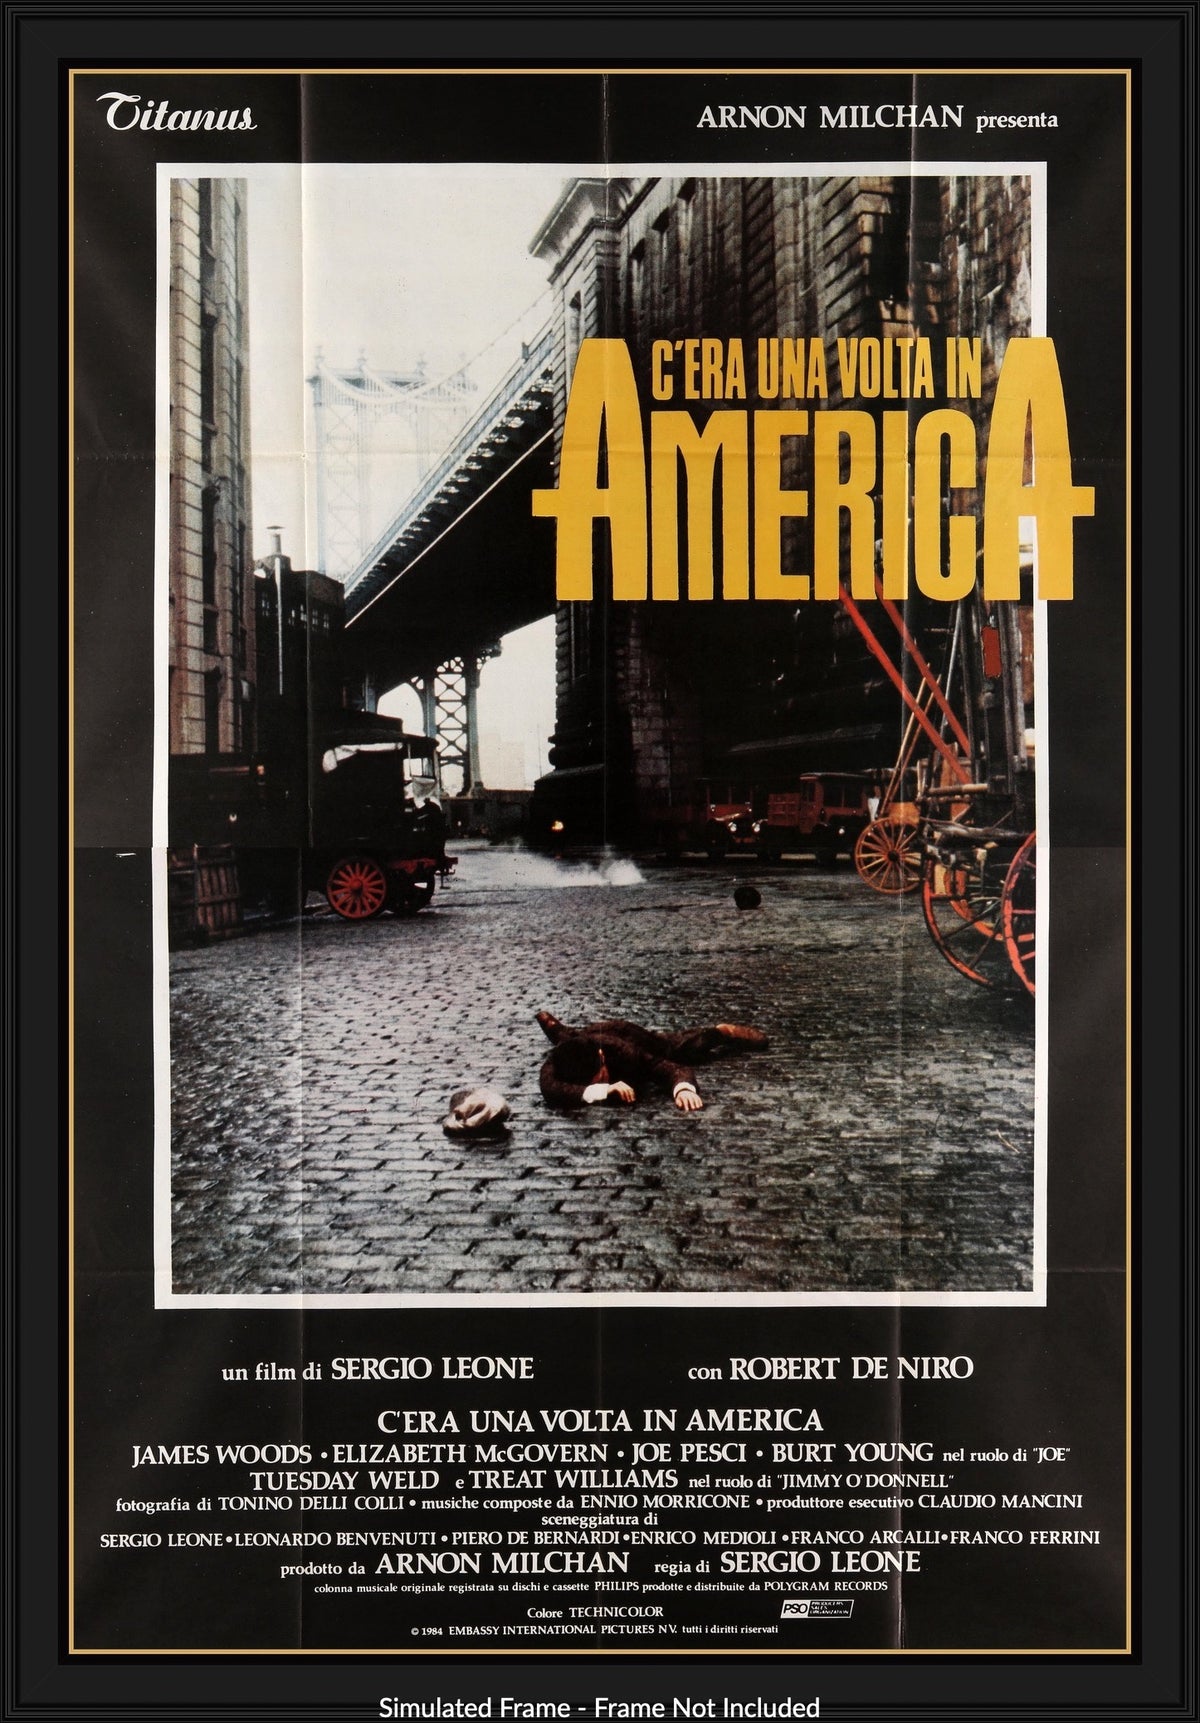 1984 Once Upon A Time In America